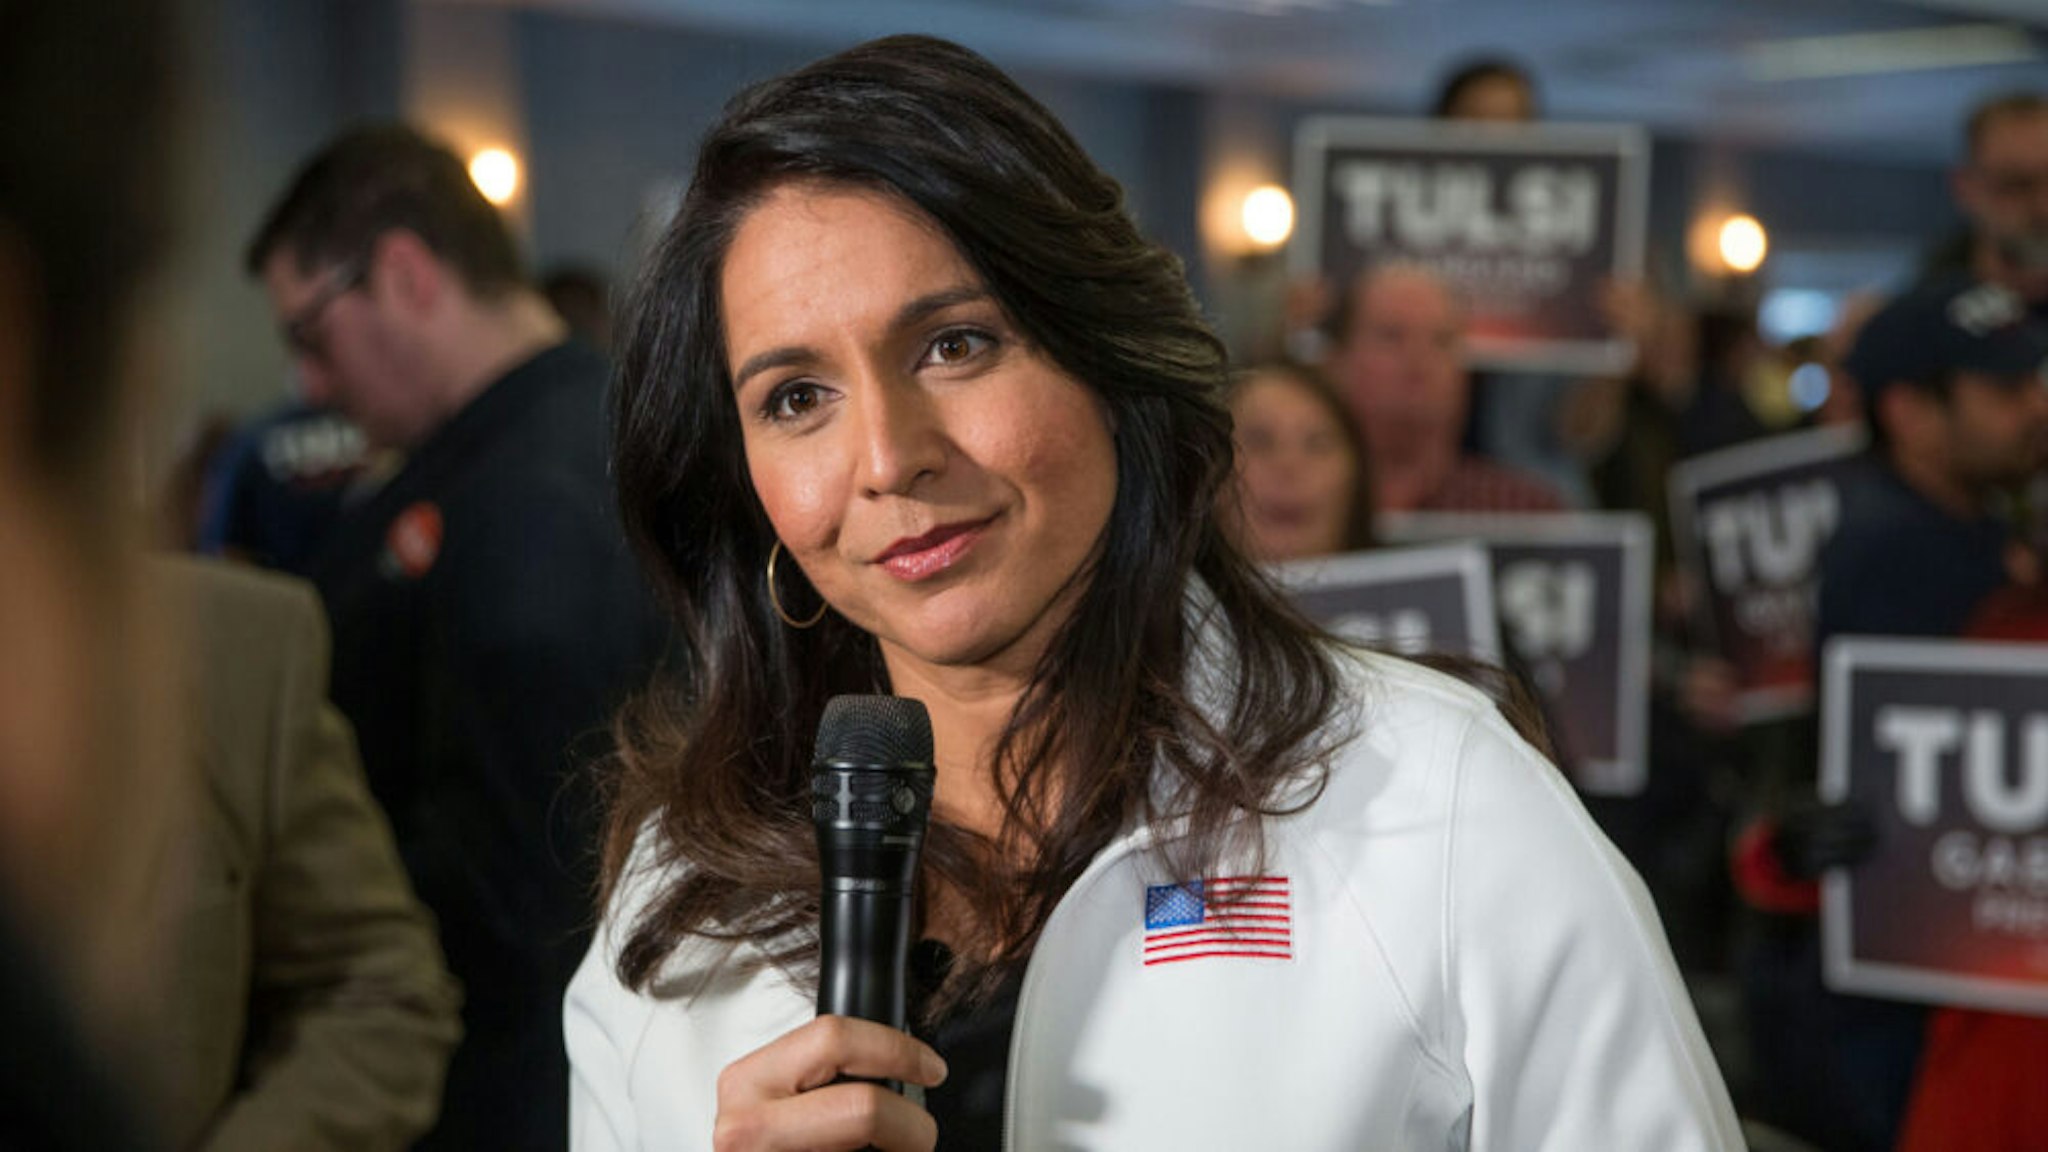 PORTSMOUTH, NH - FEBRUARY 09: Democratic presidential candidate Rep. Tulsi Gabbard (D-HI) answers media questions following a campaign event on February 9, 2020 in Portsmouth, New Hampshire. The first in the nation primary is on Tuesday, February 11.